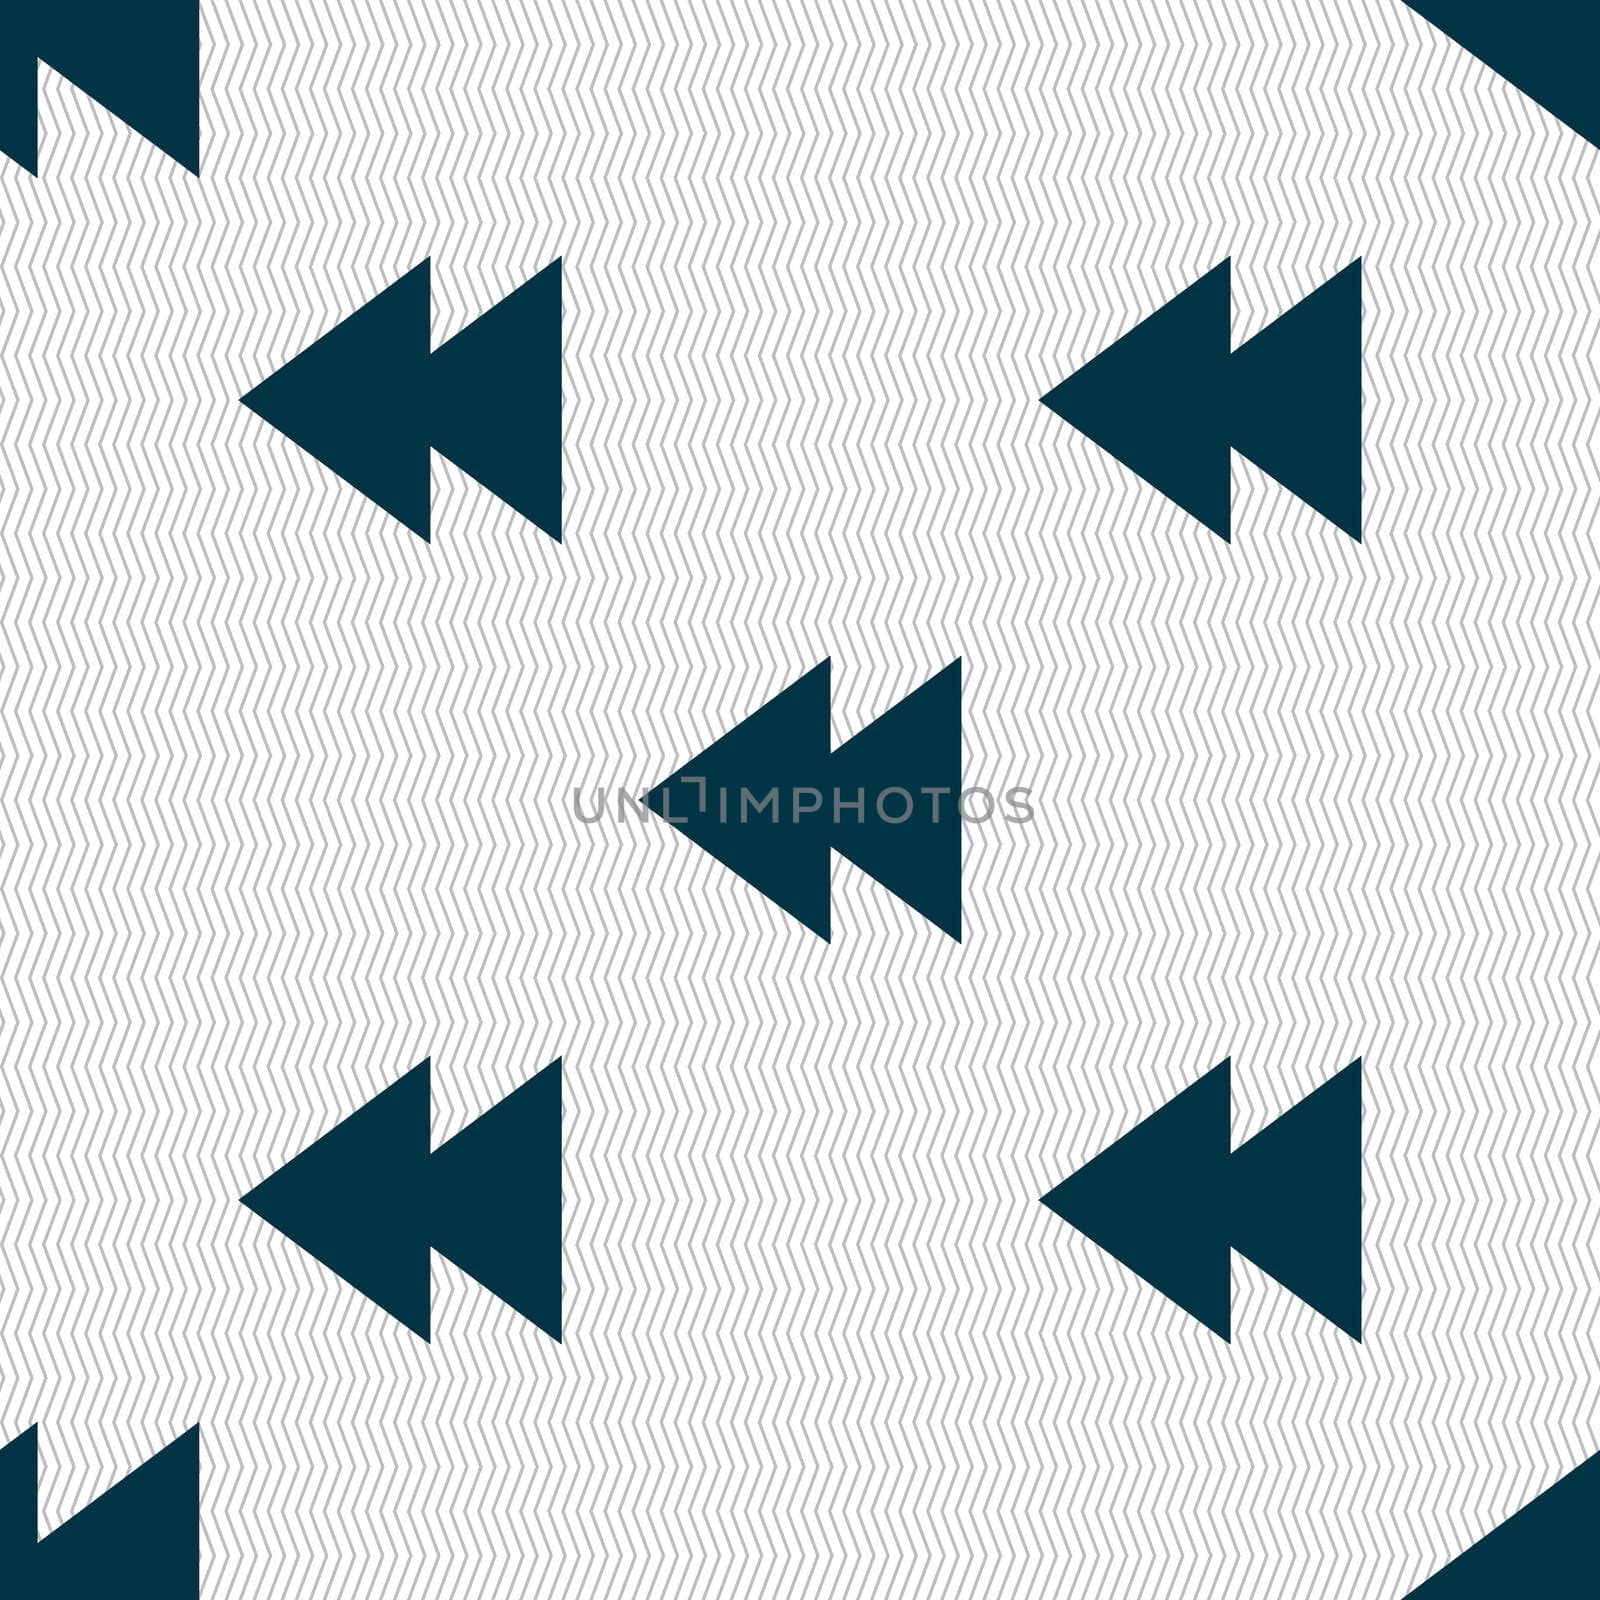 multimedia sign icon. Player navigation symbol. Seamless abstract background with geometric shapes. illustration